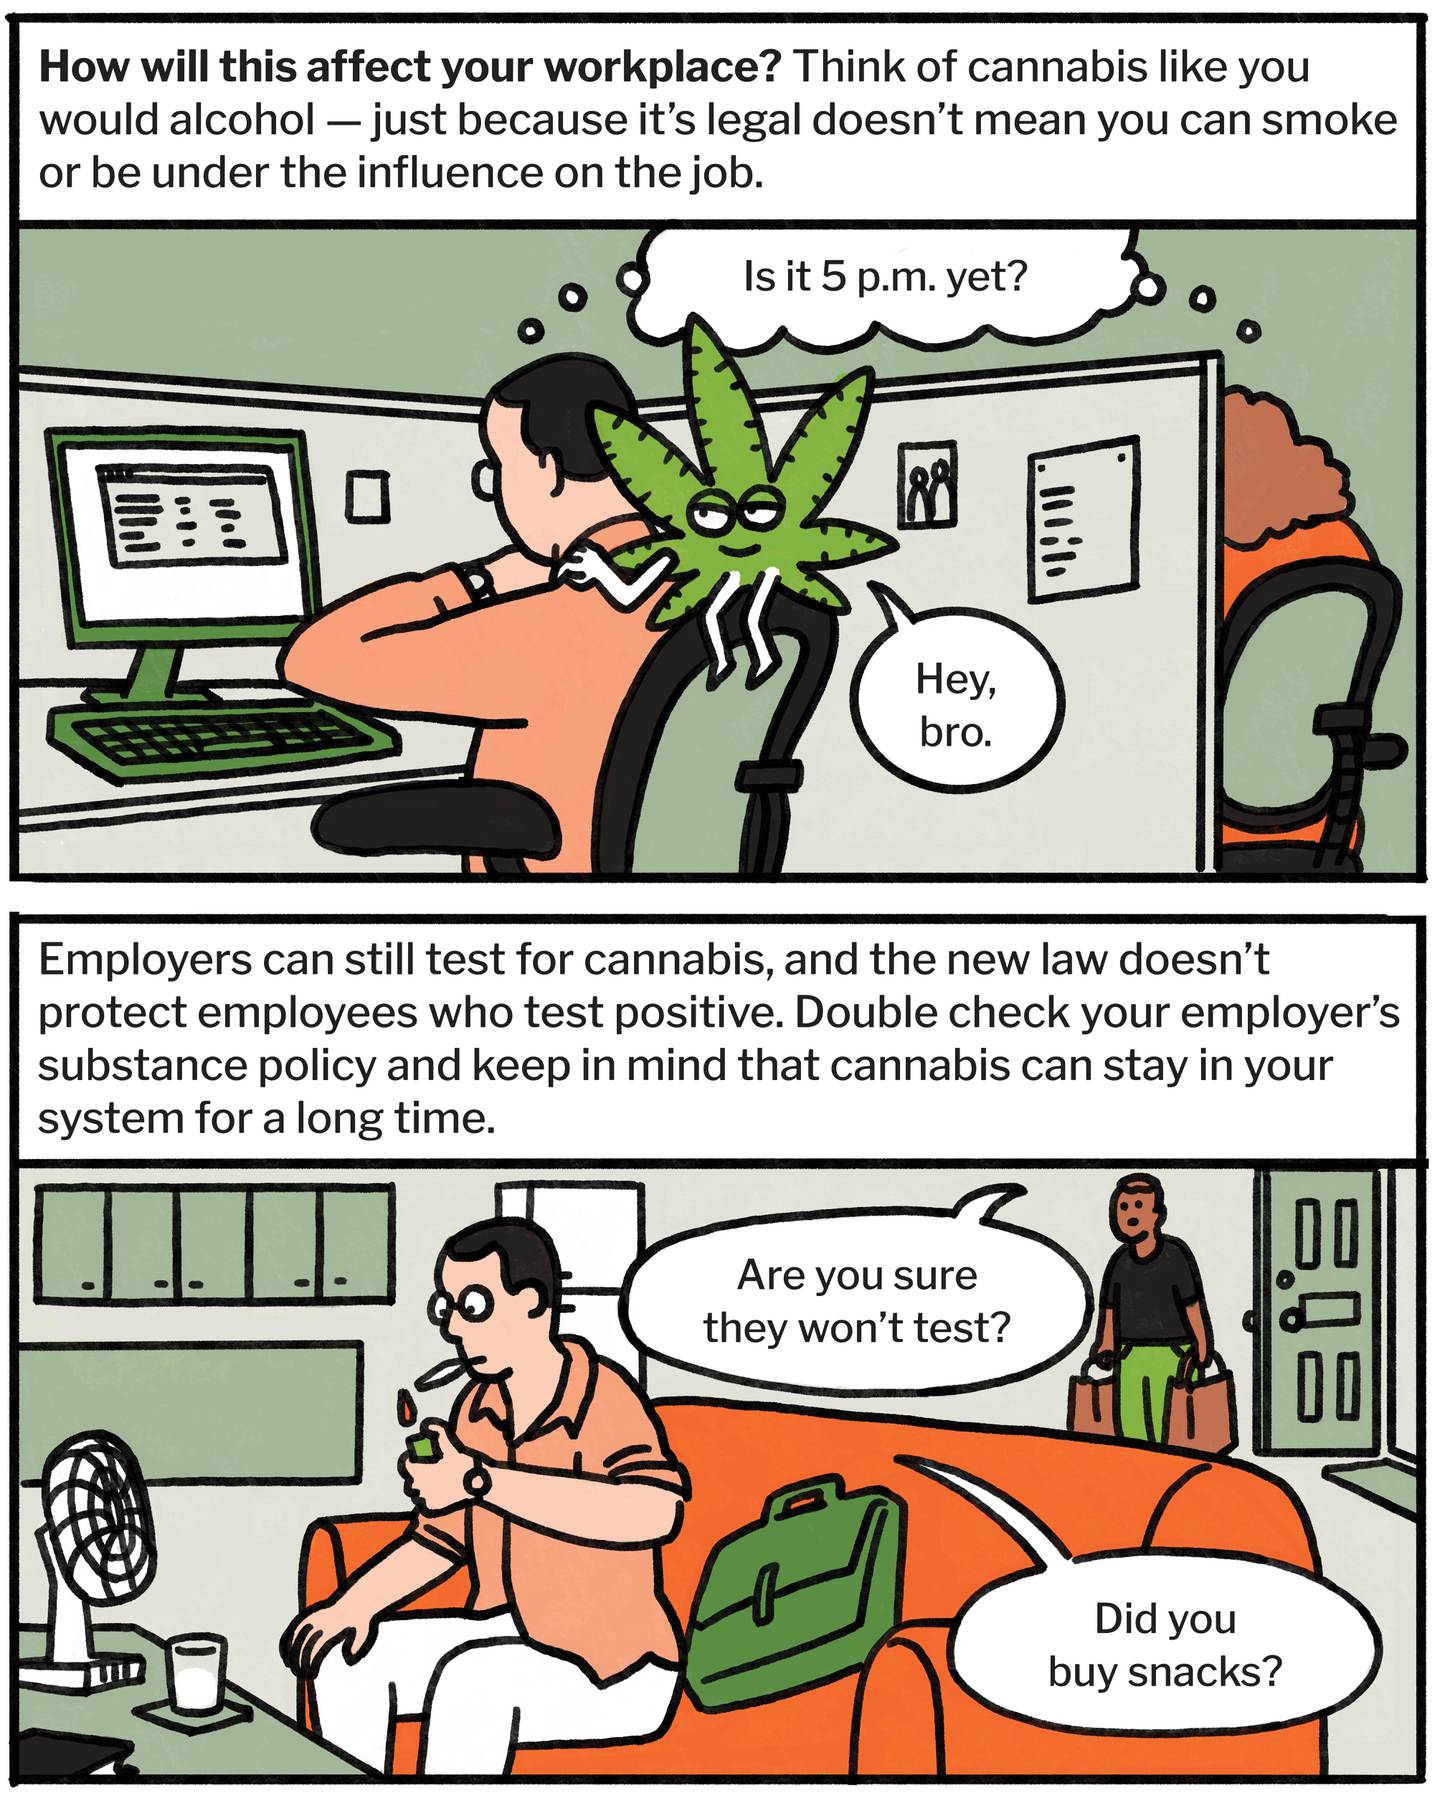 How will this affect your workplace? Think of cannabis like you would alcohol — just because it’s legal doesn’t mean you can smoke or be under the influence on the job. mployers can still test for cannabis, and the new law doesn’t protect employees who test positive. Double check your employer’s substance policy and keep in mind that cannabis can stay in your system for a long time.